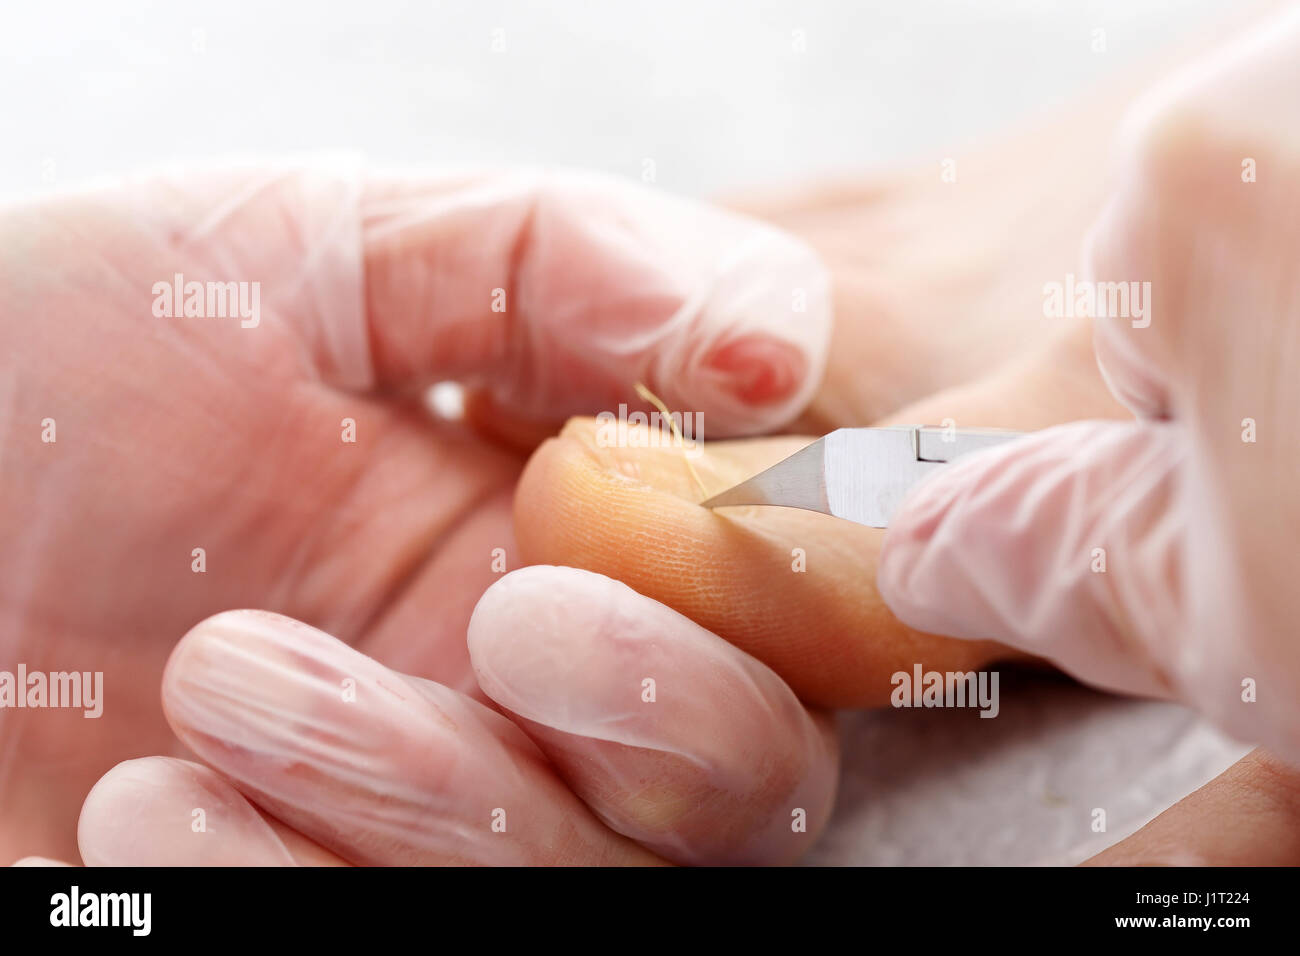 Podology. Removing the prints on the foot. Pedicure. Pedicure medicinal. Stock Photo